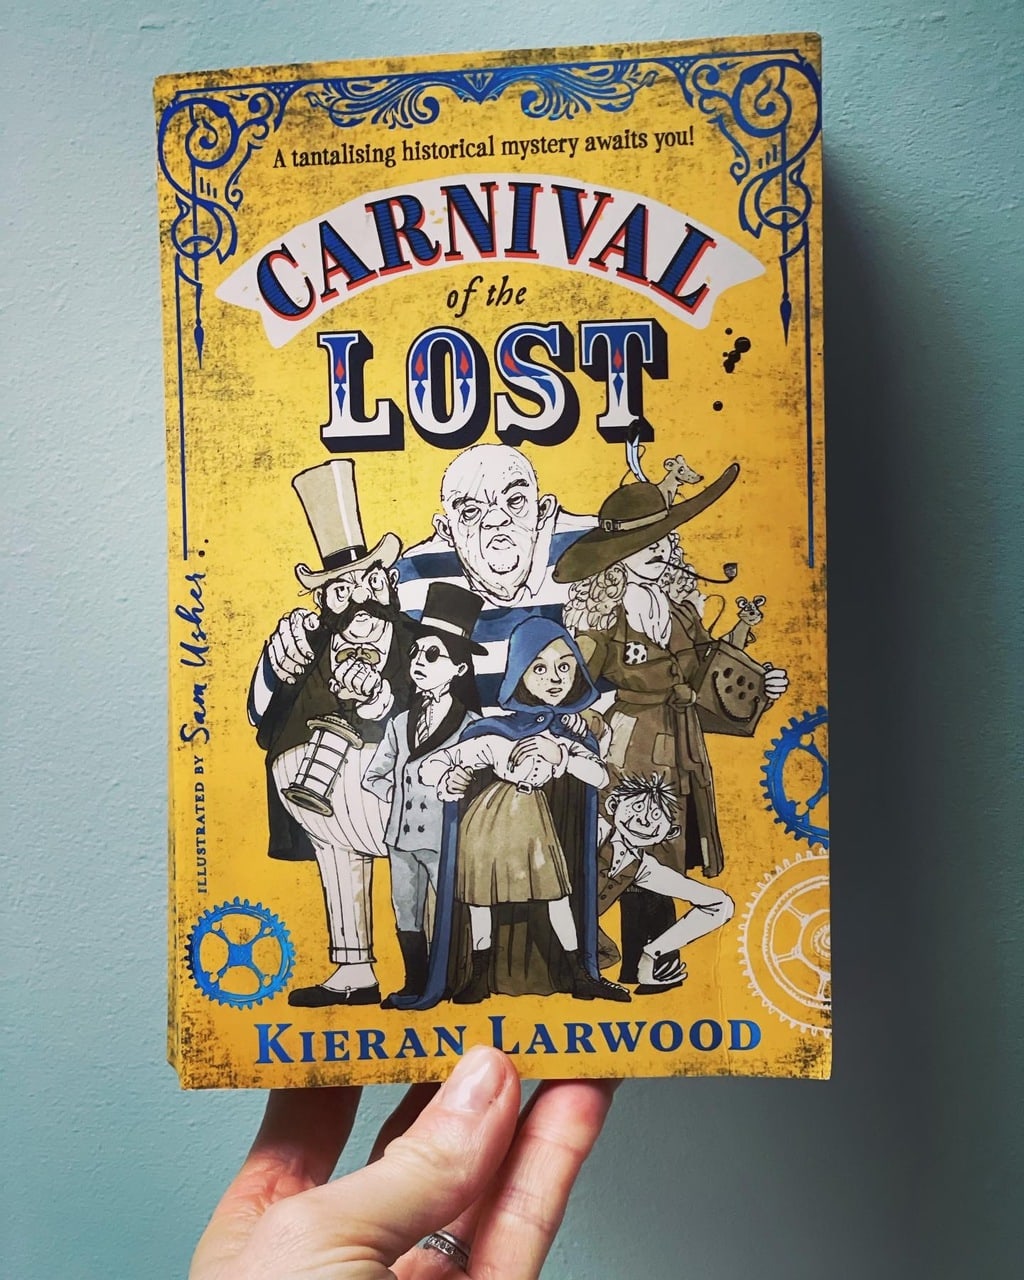 Carnival of the Lost